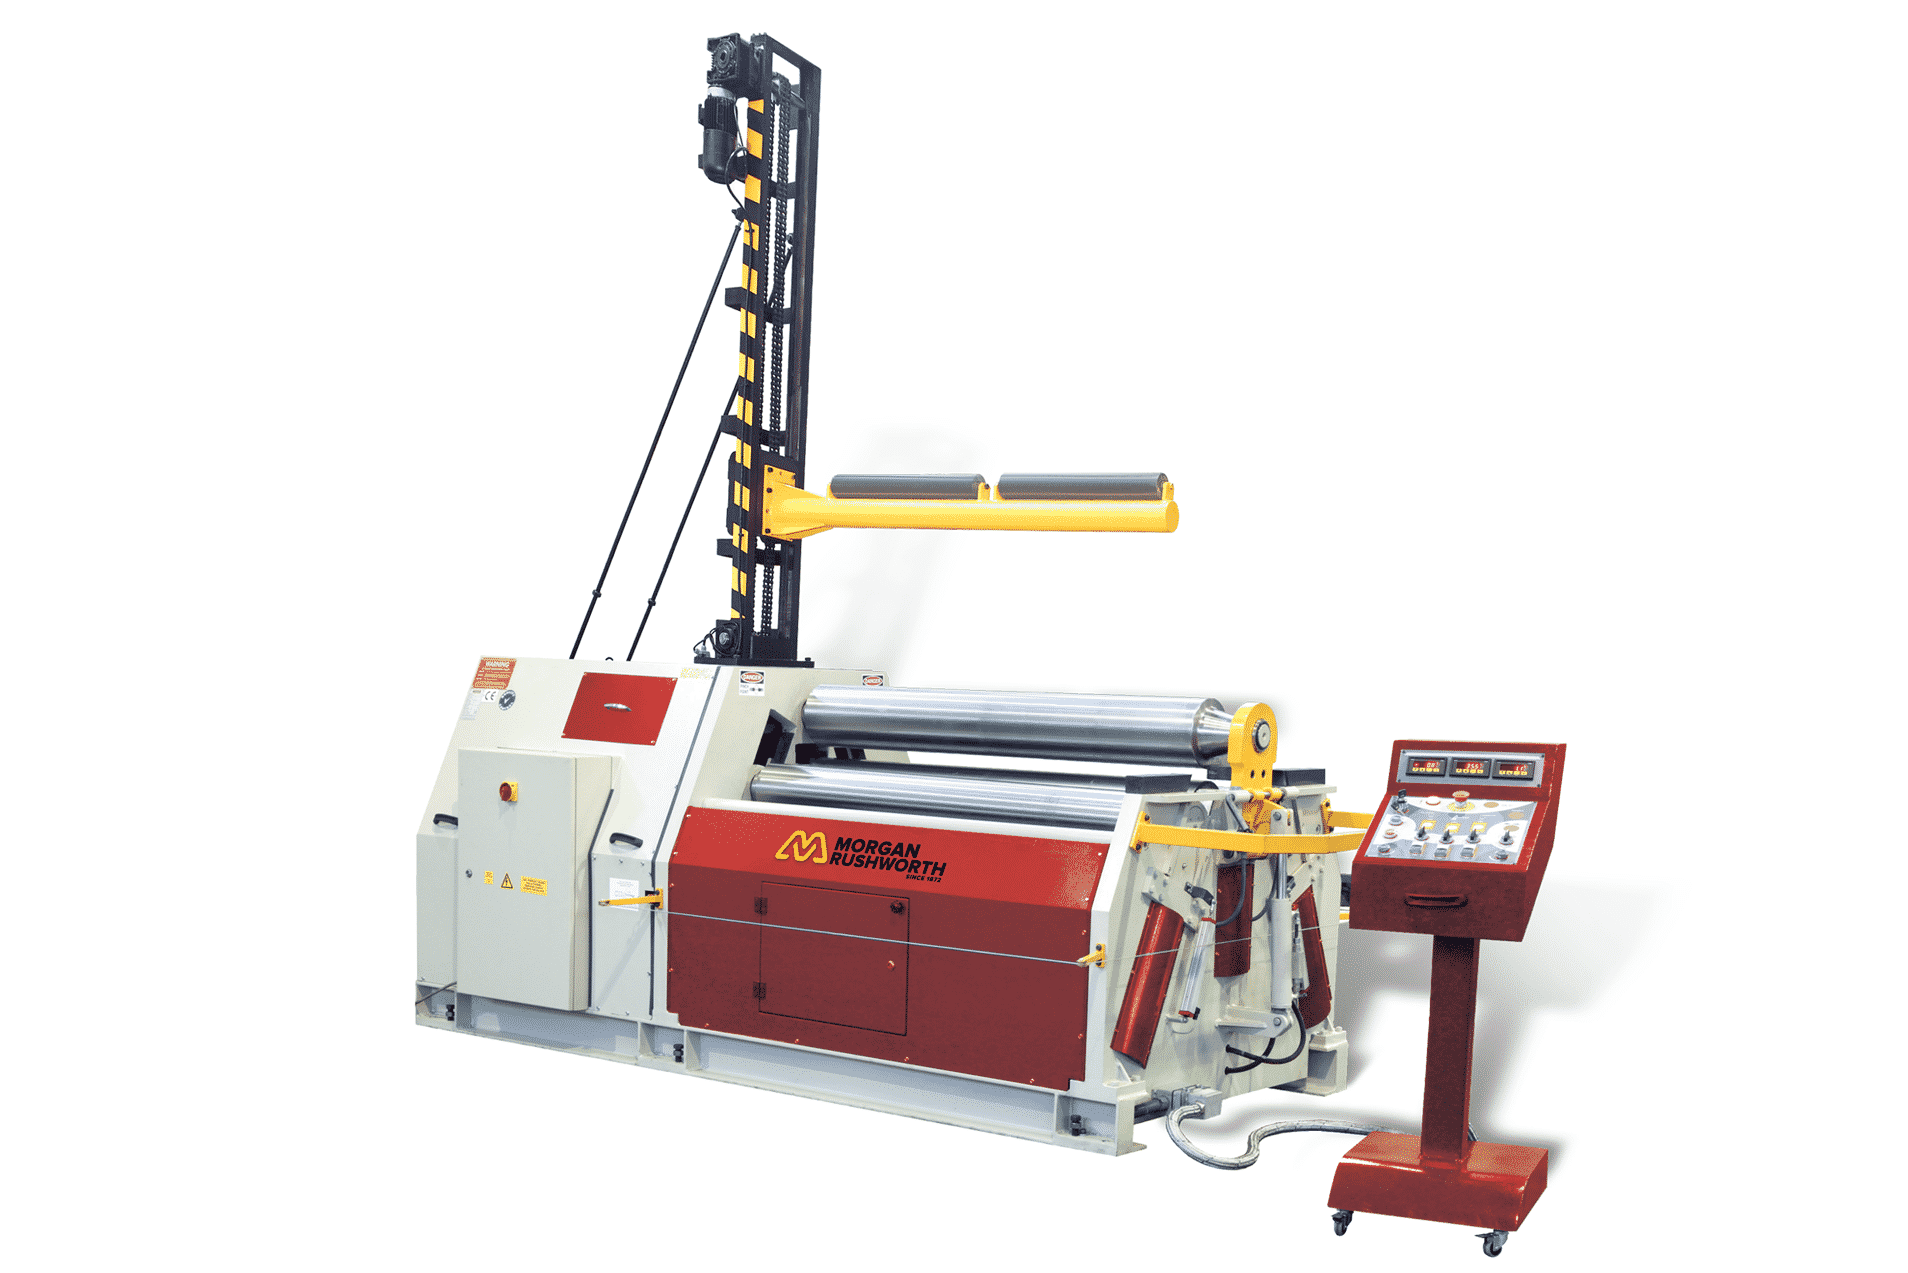 Front view of the Morgan Rushworth DPBM-4 Powered Bending Roll featured with the standard controller and optional central support system